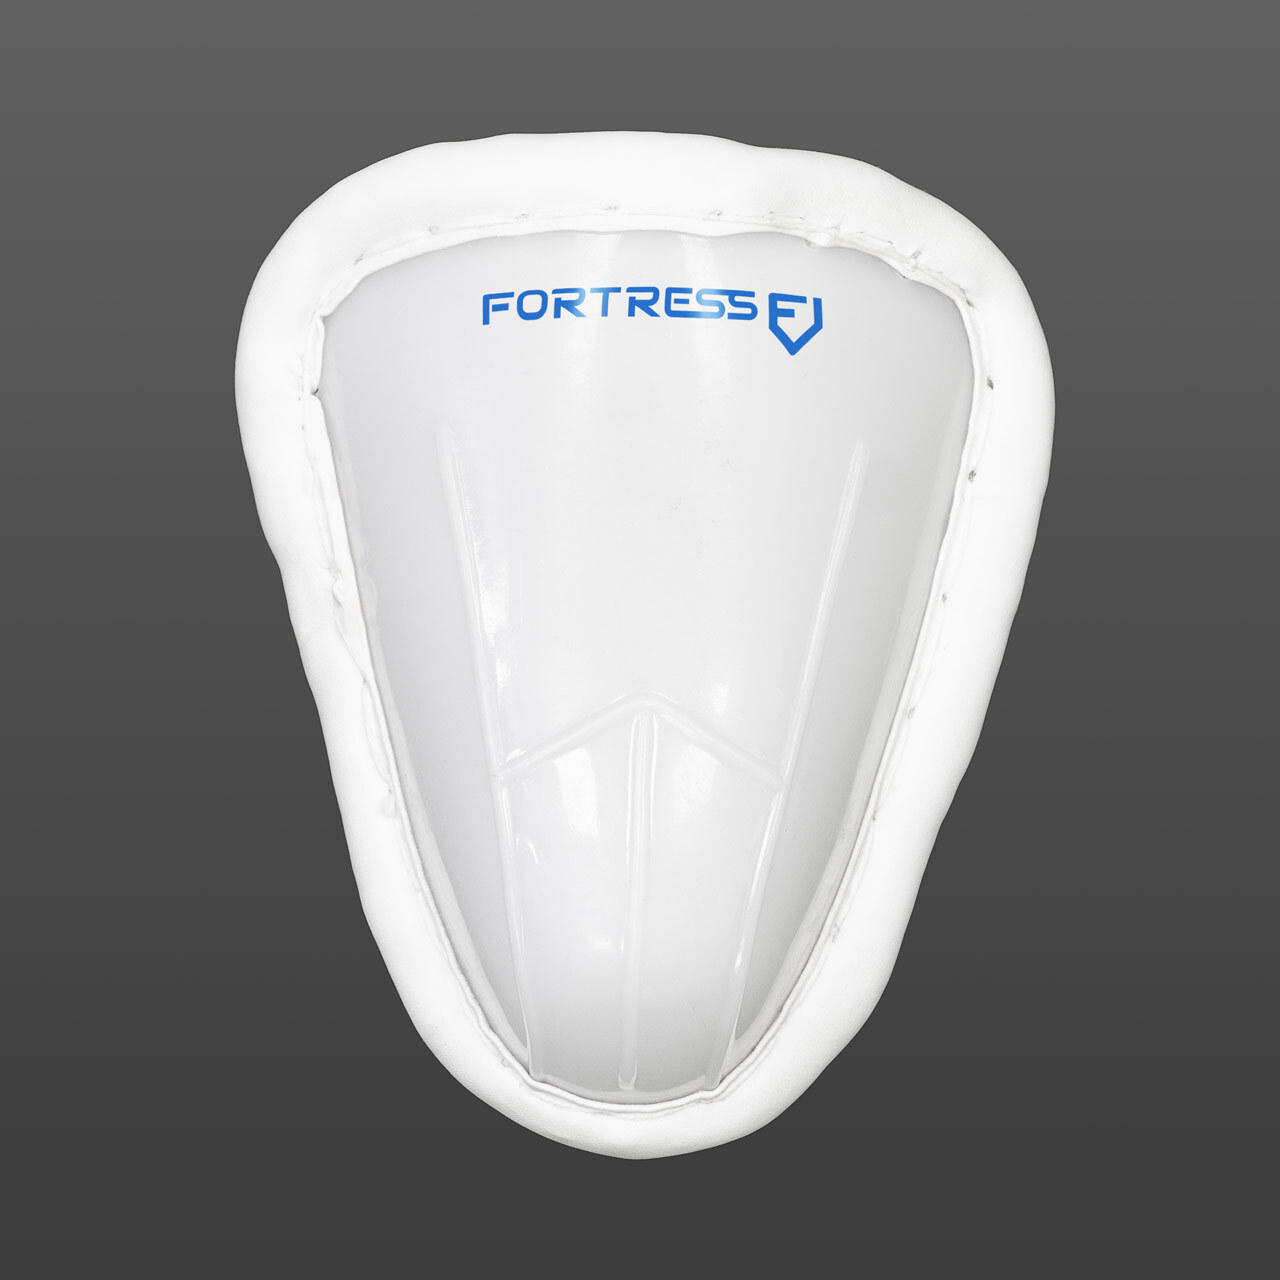 FORTRESS Original Cricket Players Set [Junior, Youth or Adult: Junior] [Left or Right Handed: Left Handed] [Bat Size:: Harrow (2lbs 4oz - 2lbs 8oz)]